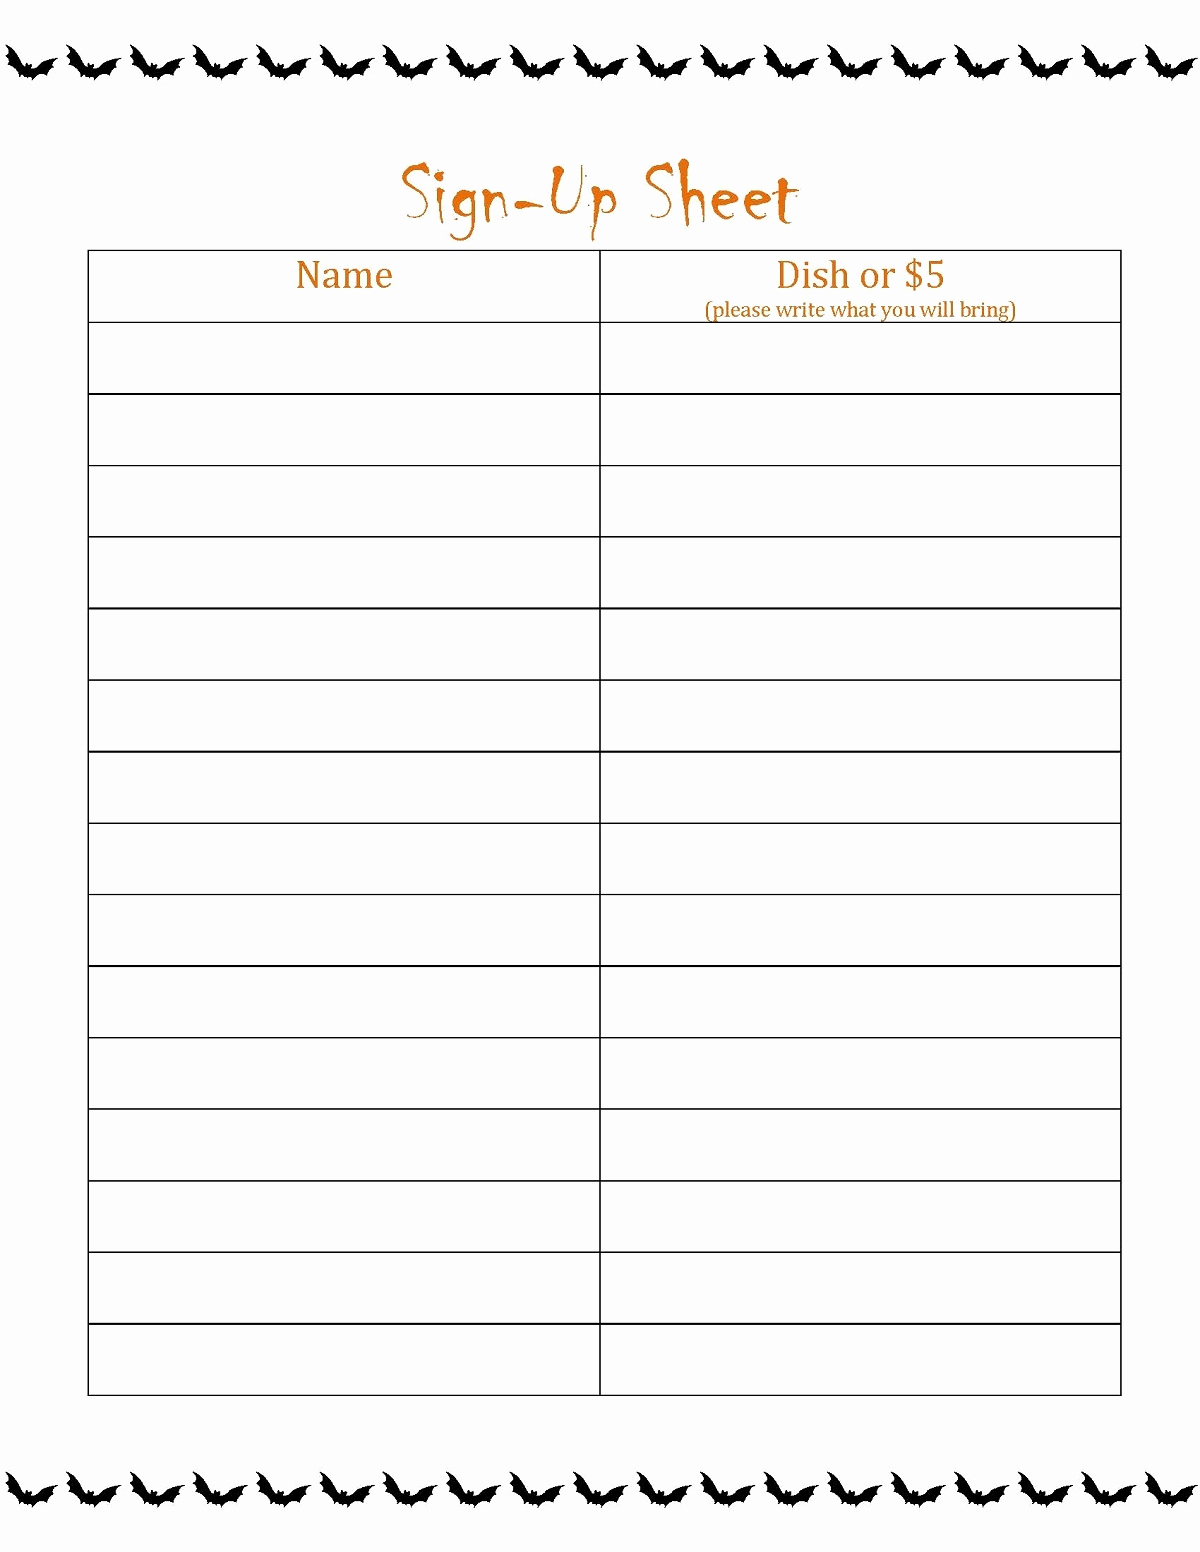 Blank Sign In Sheet Awesome Blank Sign Up Sheet Printable